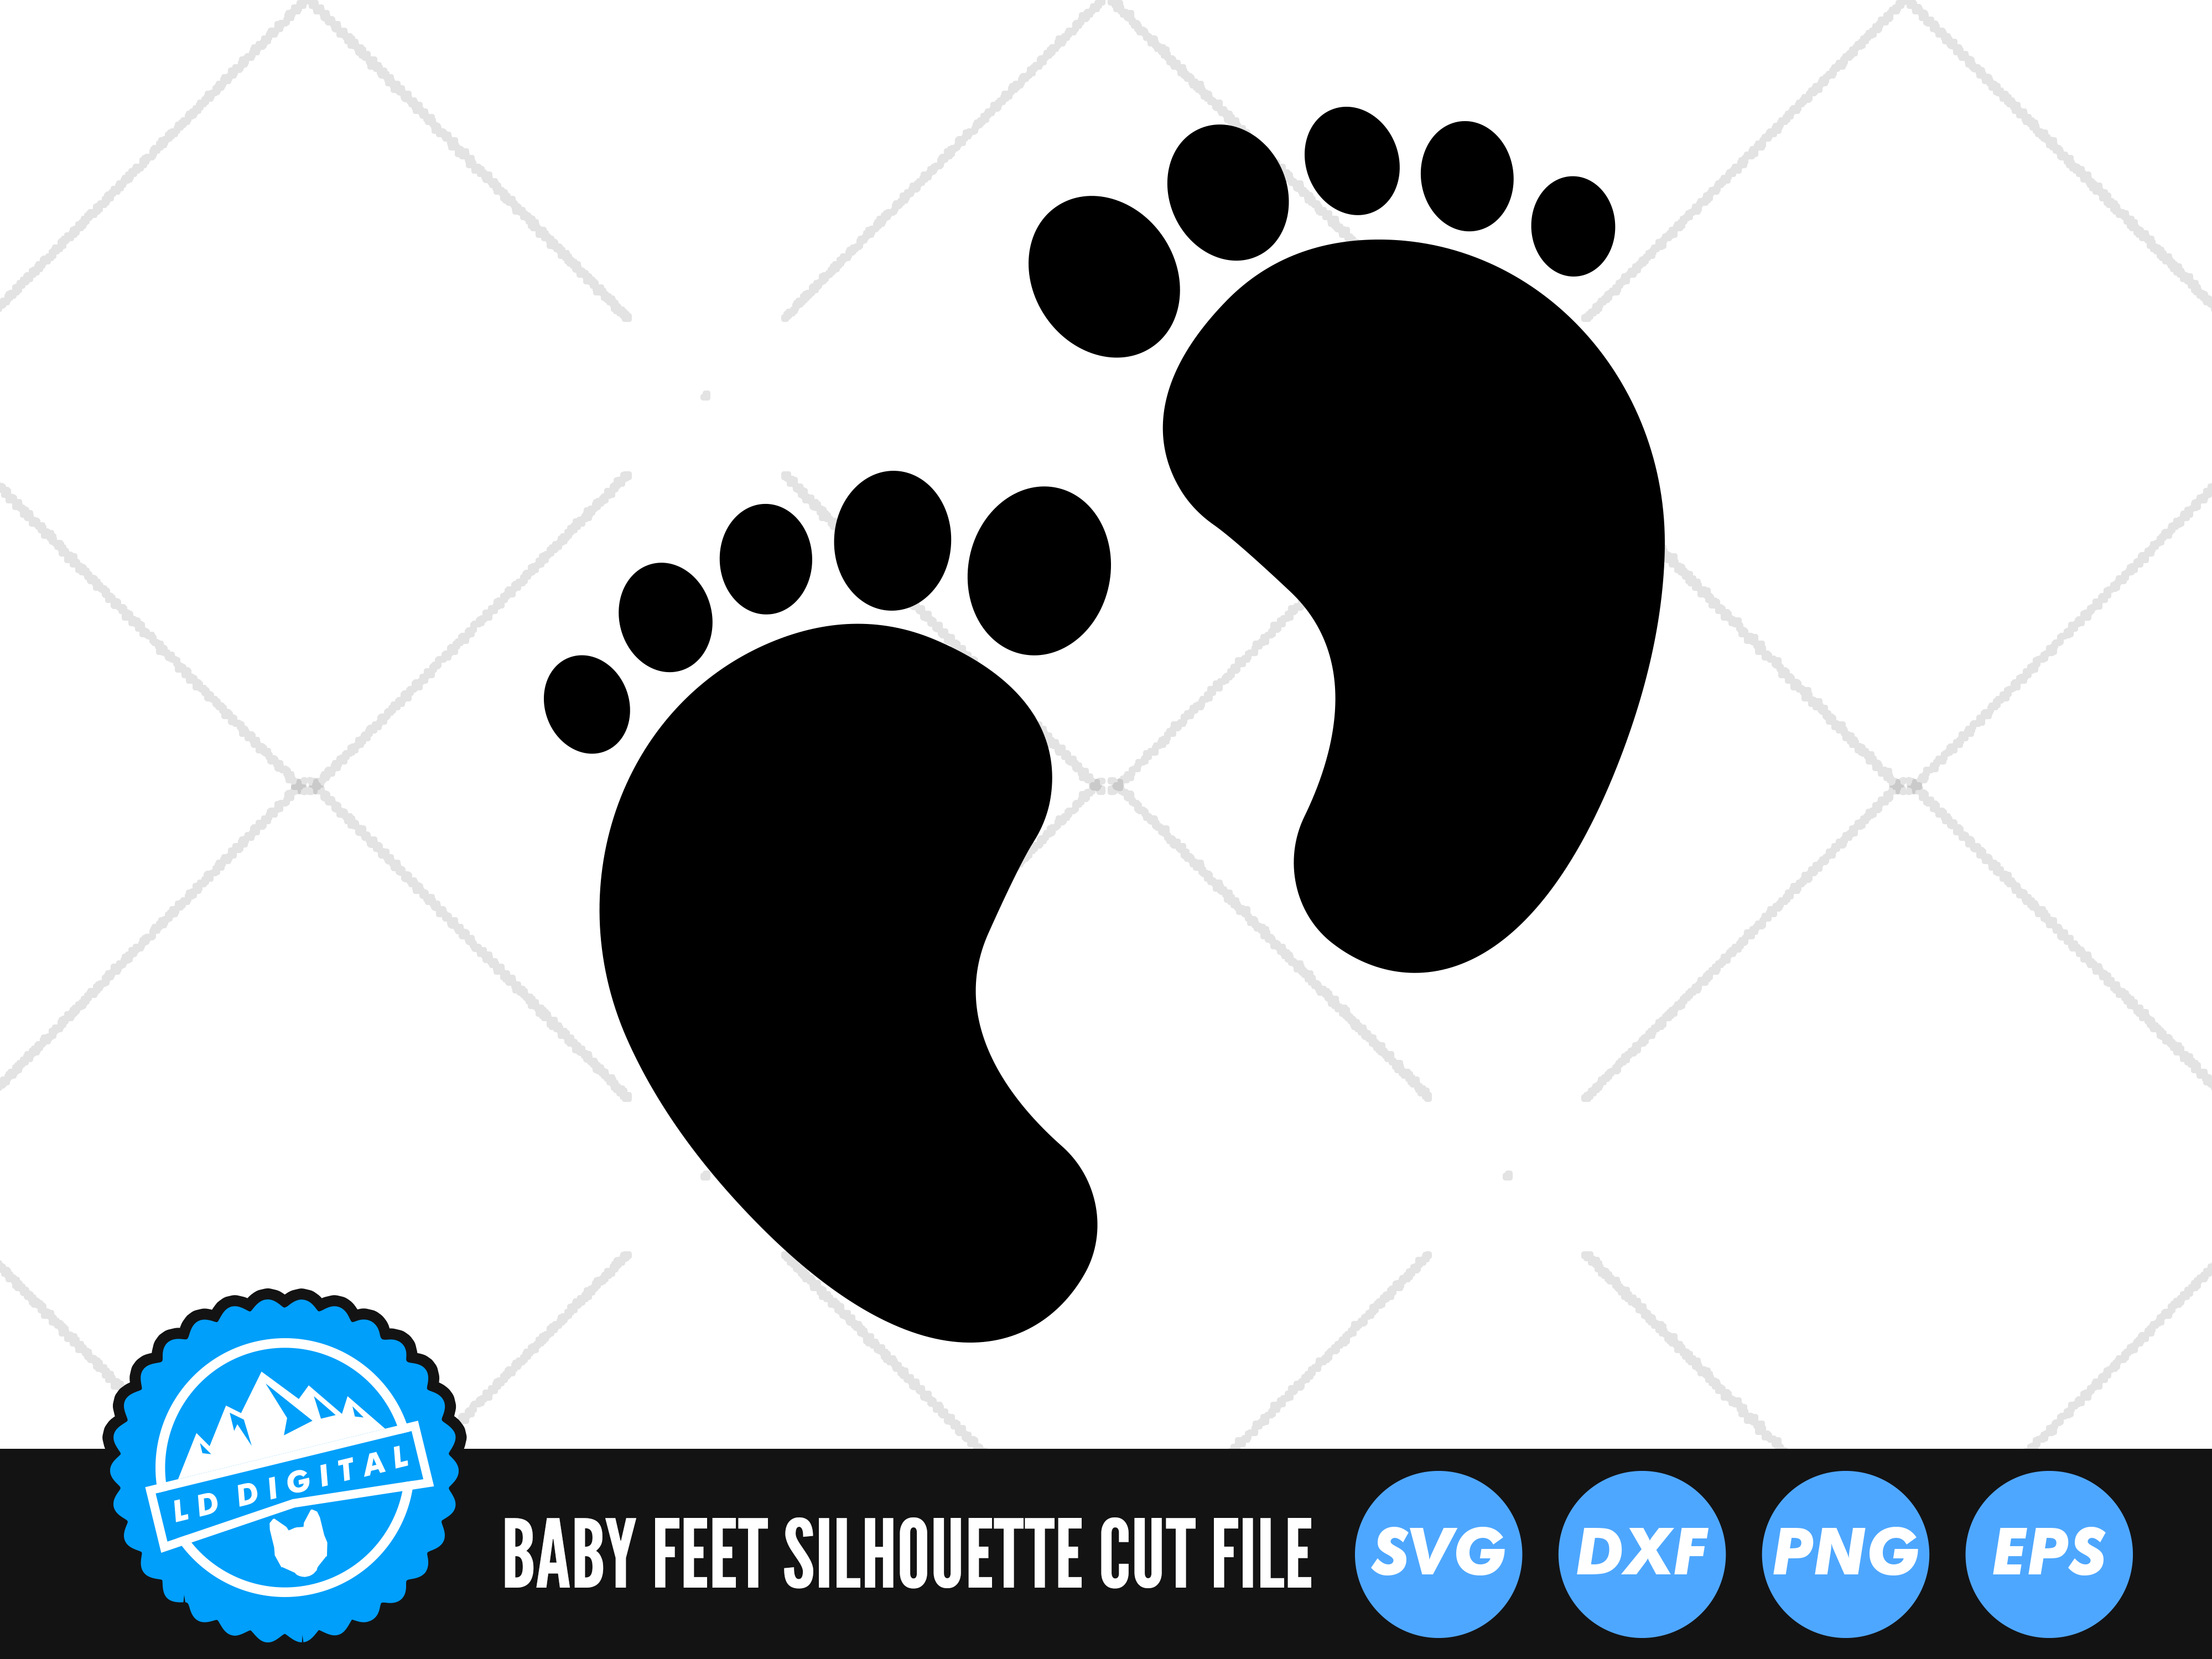 Download Baby Feet Svg Baby Feet Silhouette Cut File By Ld Digital Thehungryjpeg Com